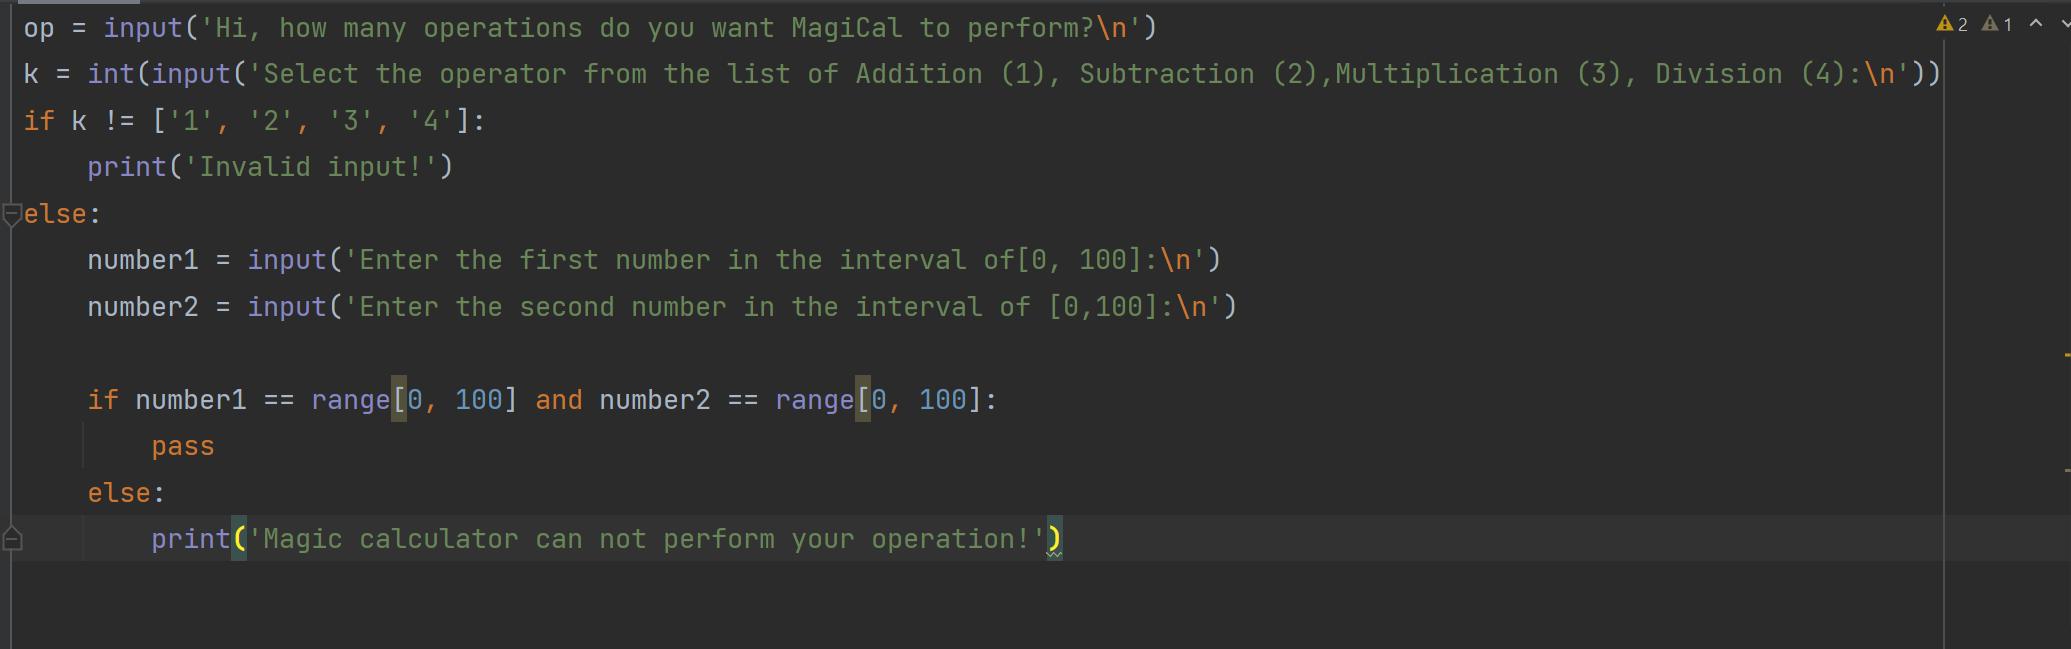 op = input('Hi, how many operations do you want MagiCal to perform? ') k = int(input('Select the operator